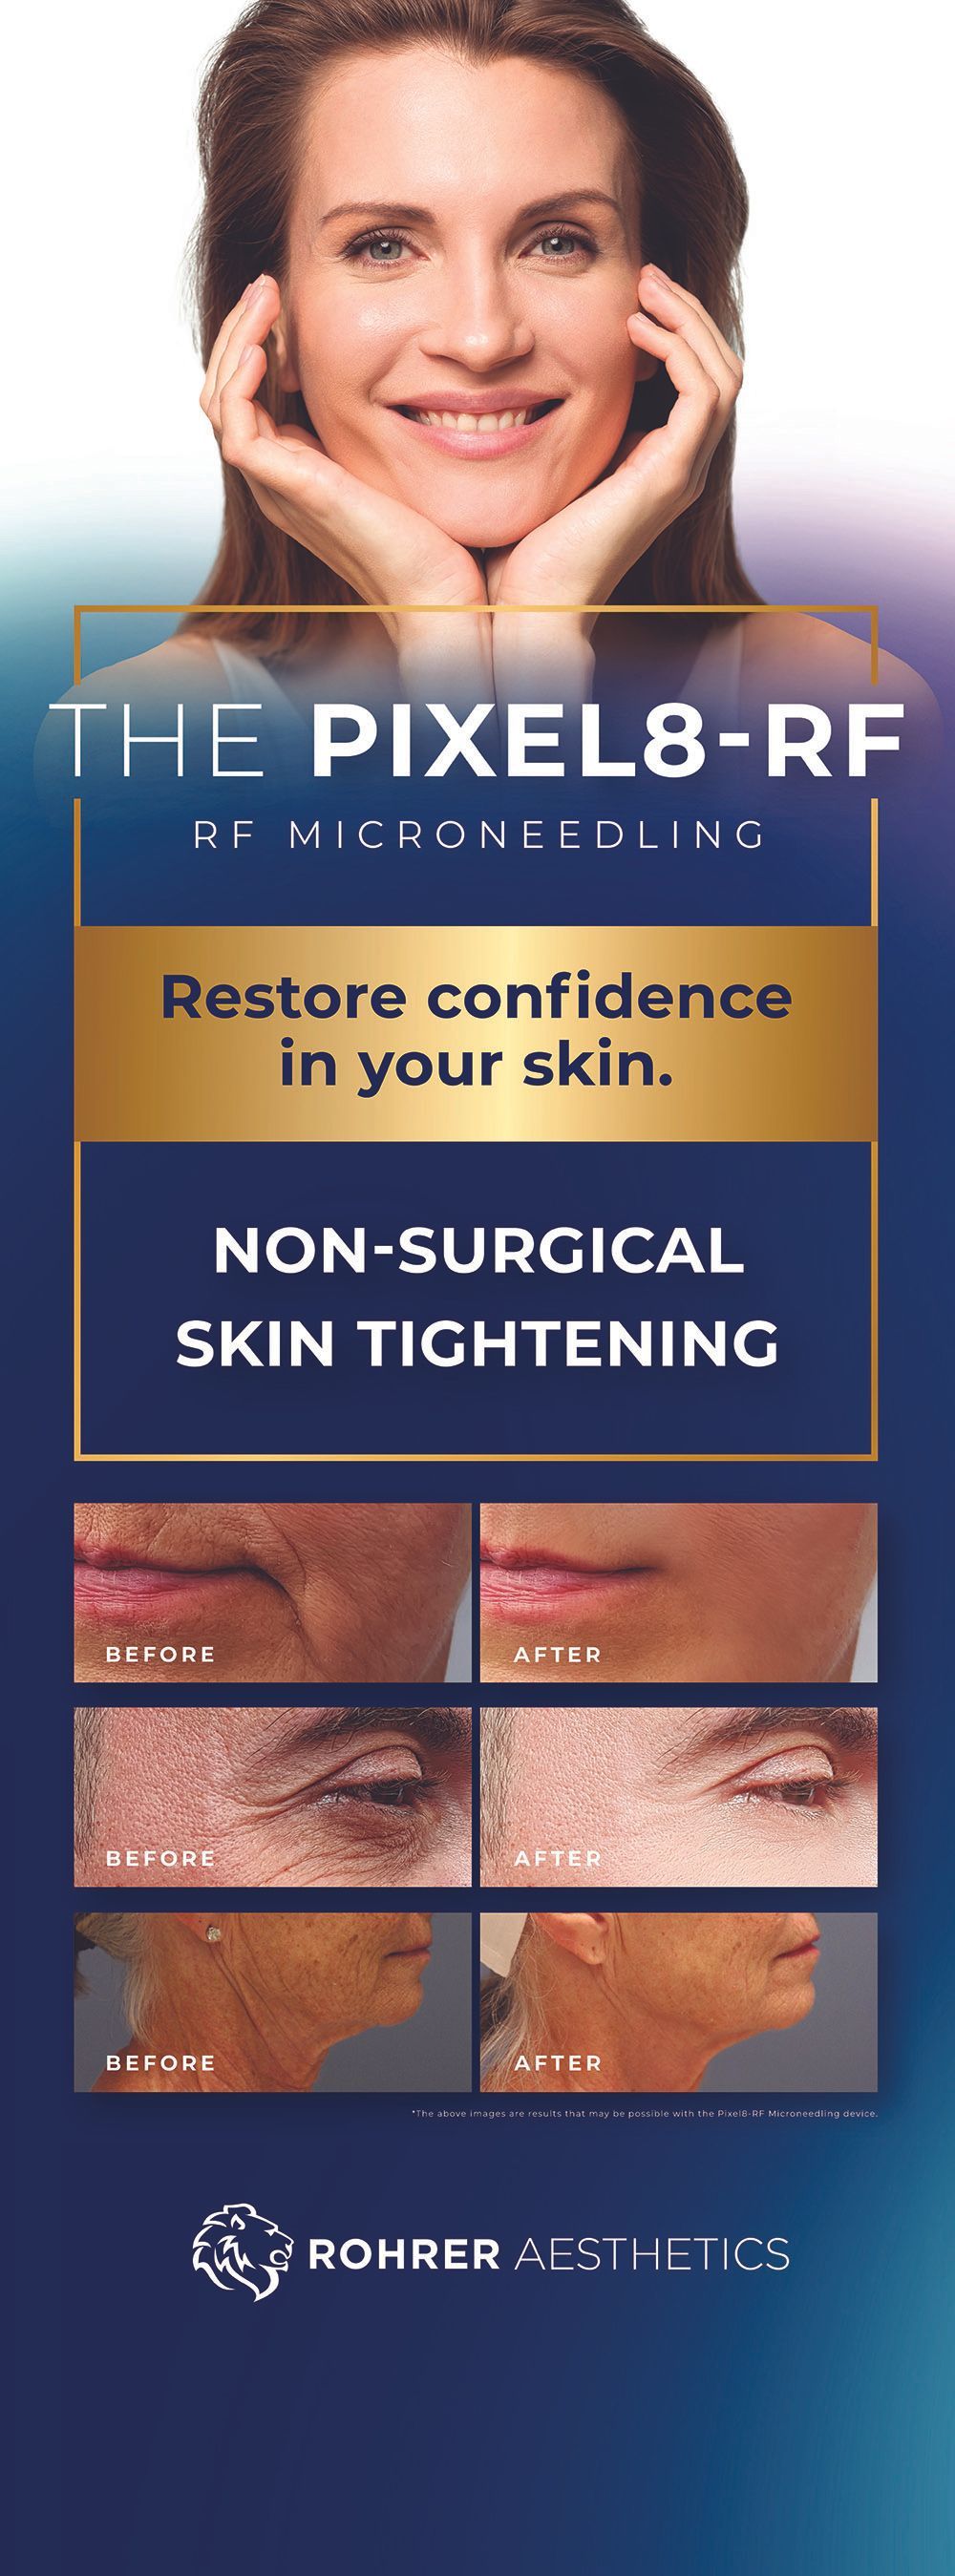 Pixel8-RF – Radiofrequency with microneedling banner